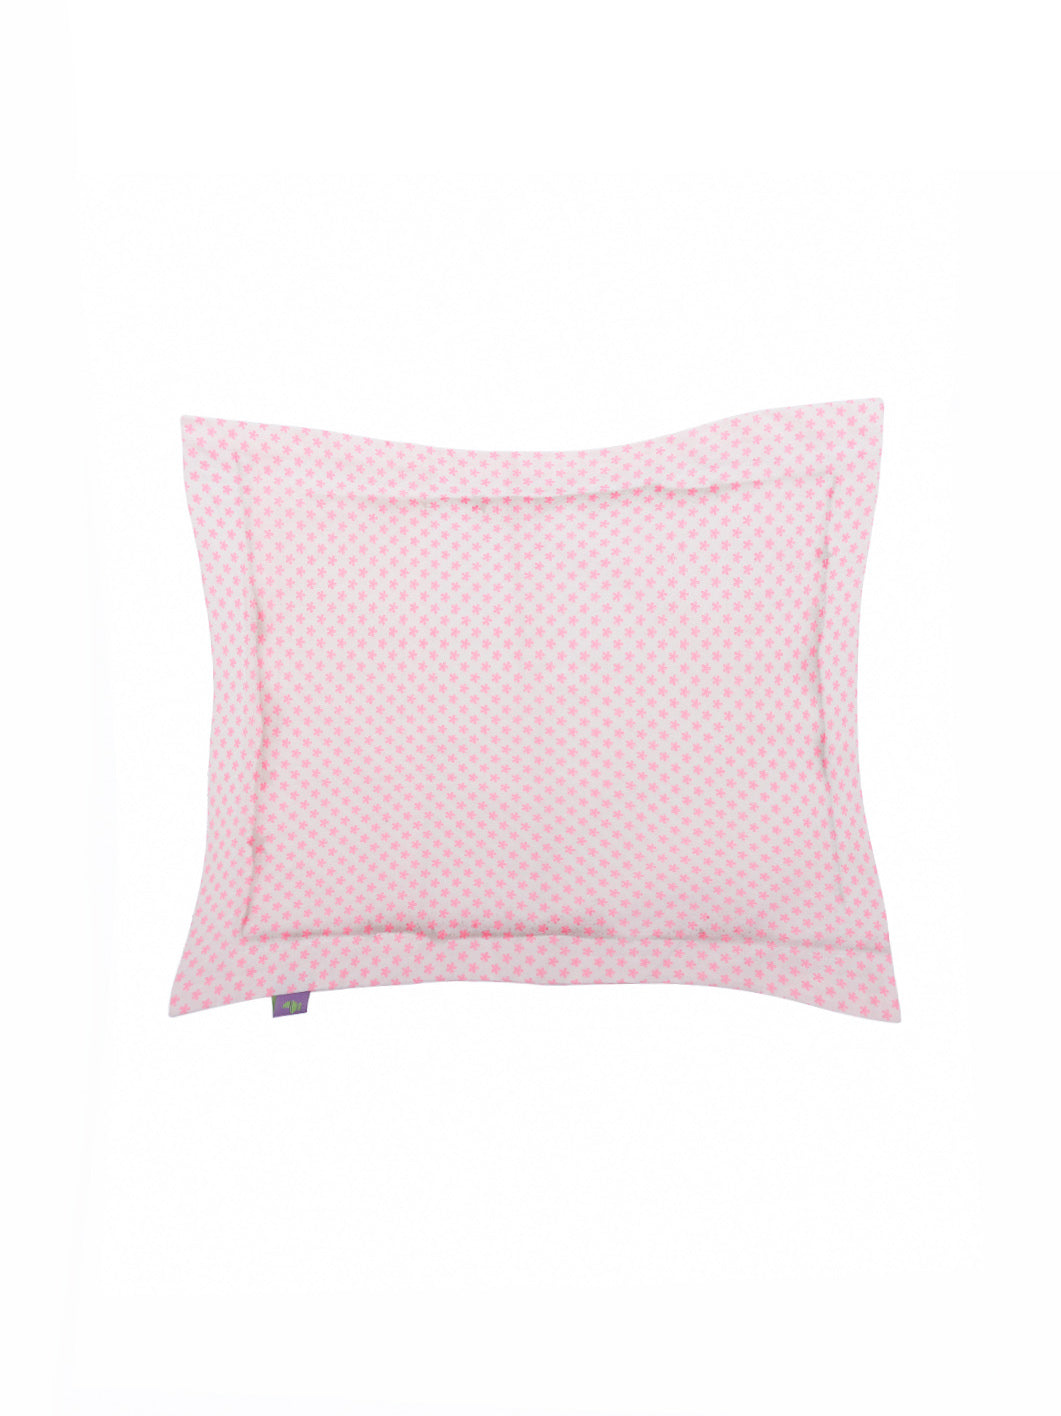 ‘White and Hot Pink Flowers’ Organic Baby Pillow Cover-1